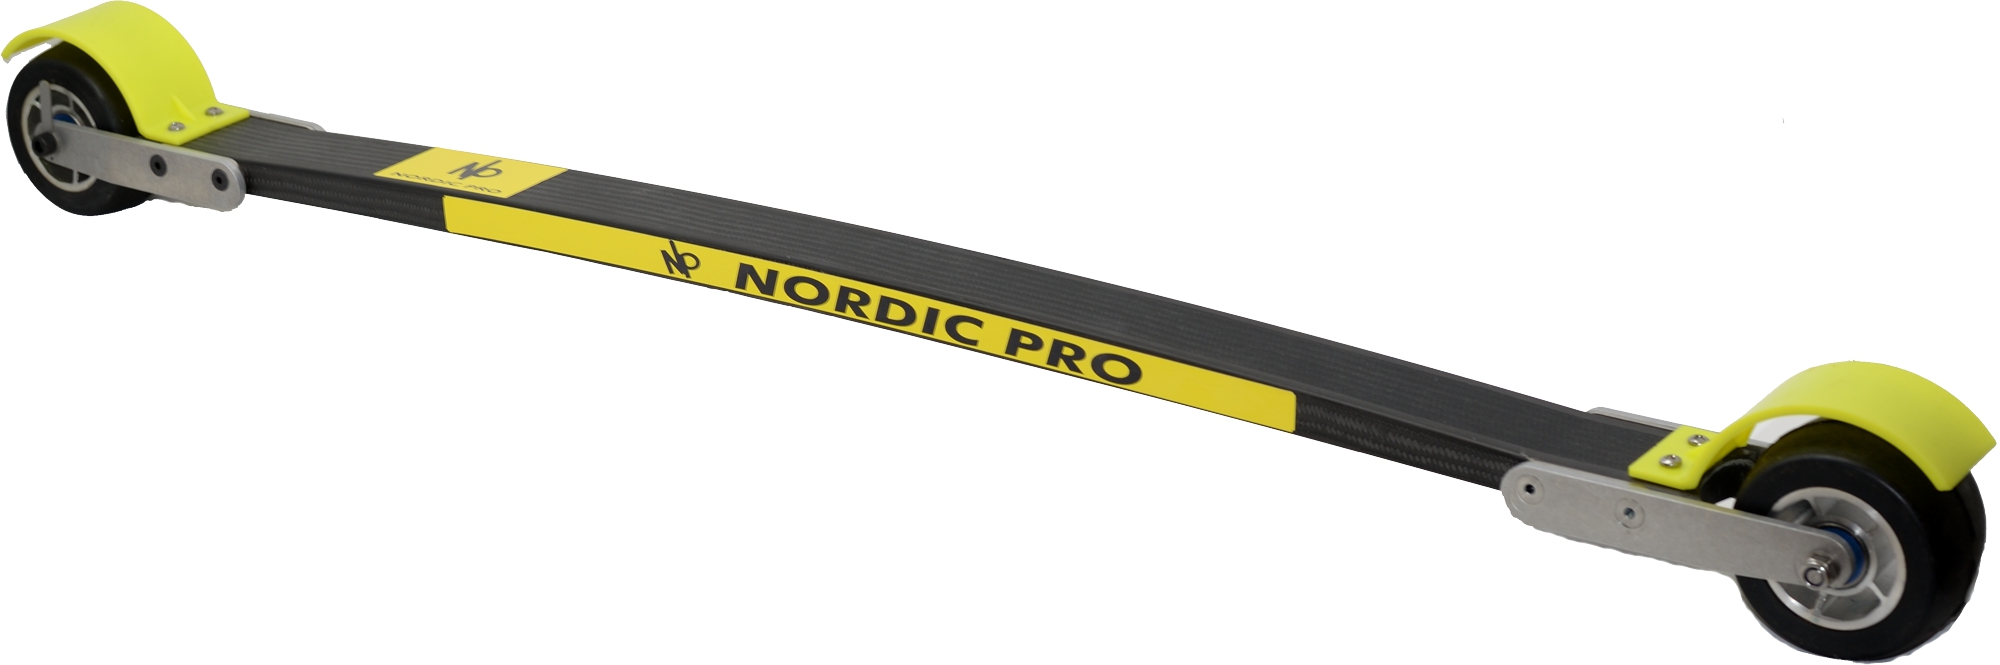 Nordic Pro Carbon Classic Skiroller